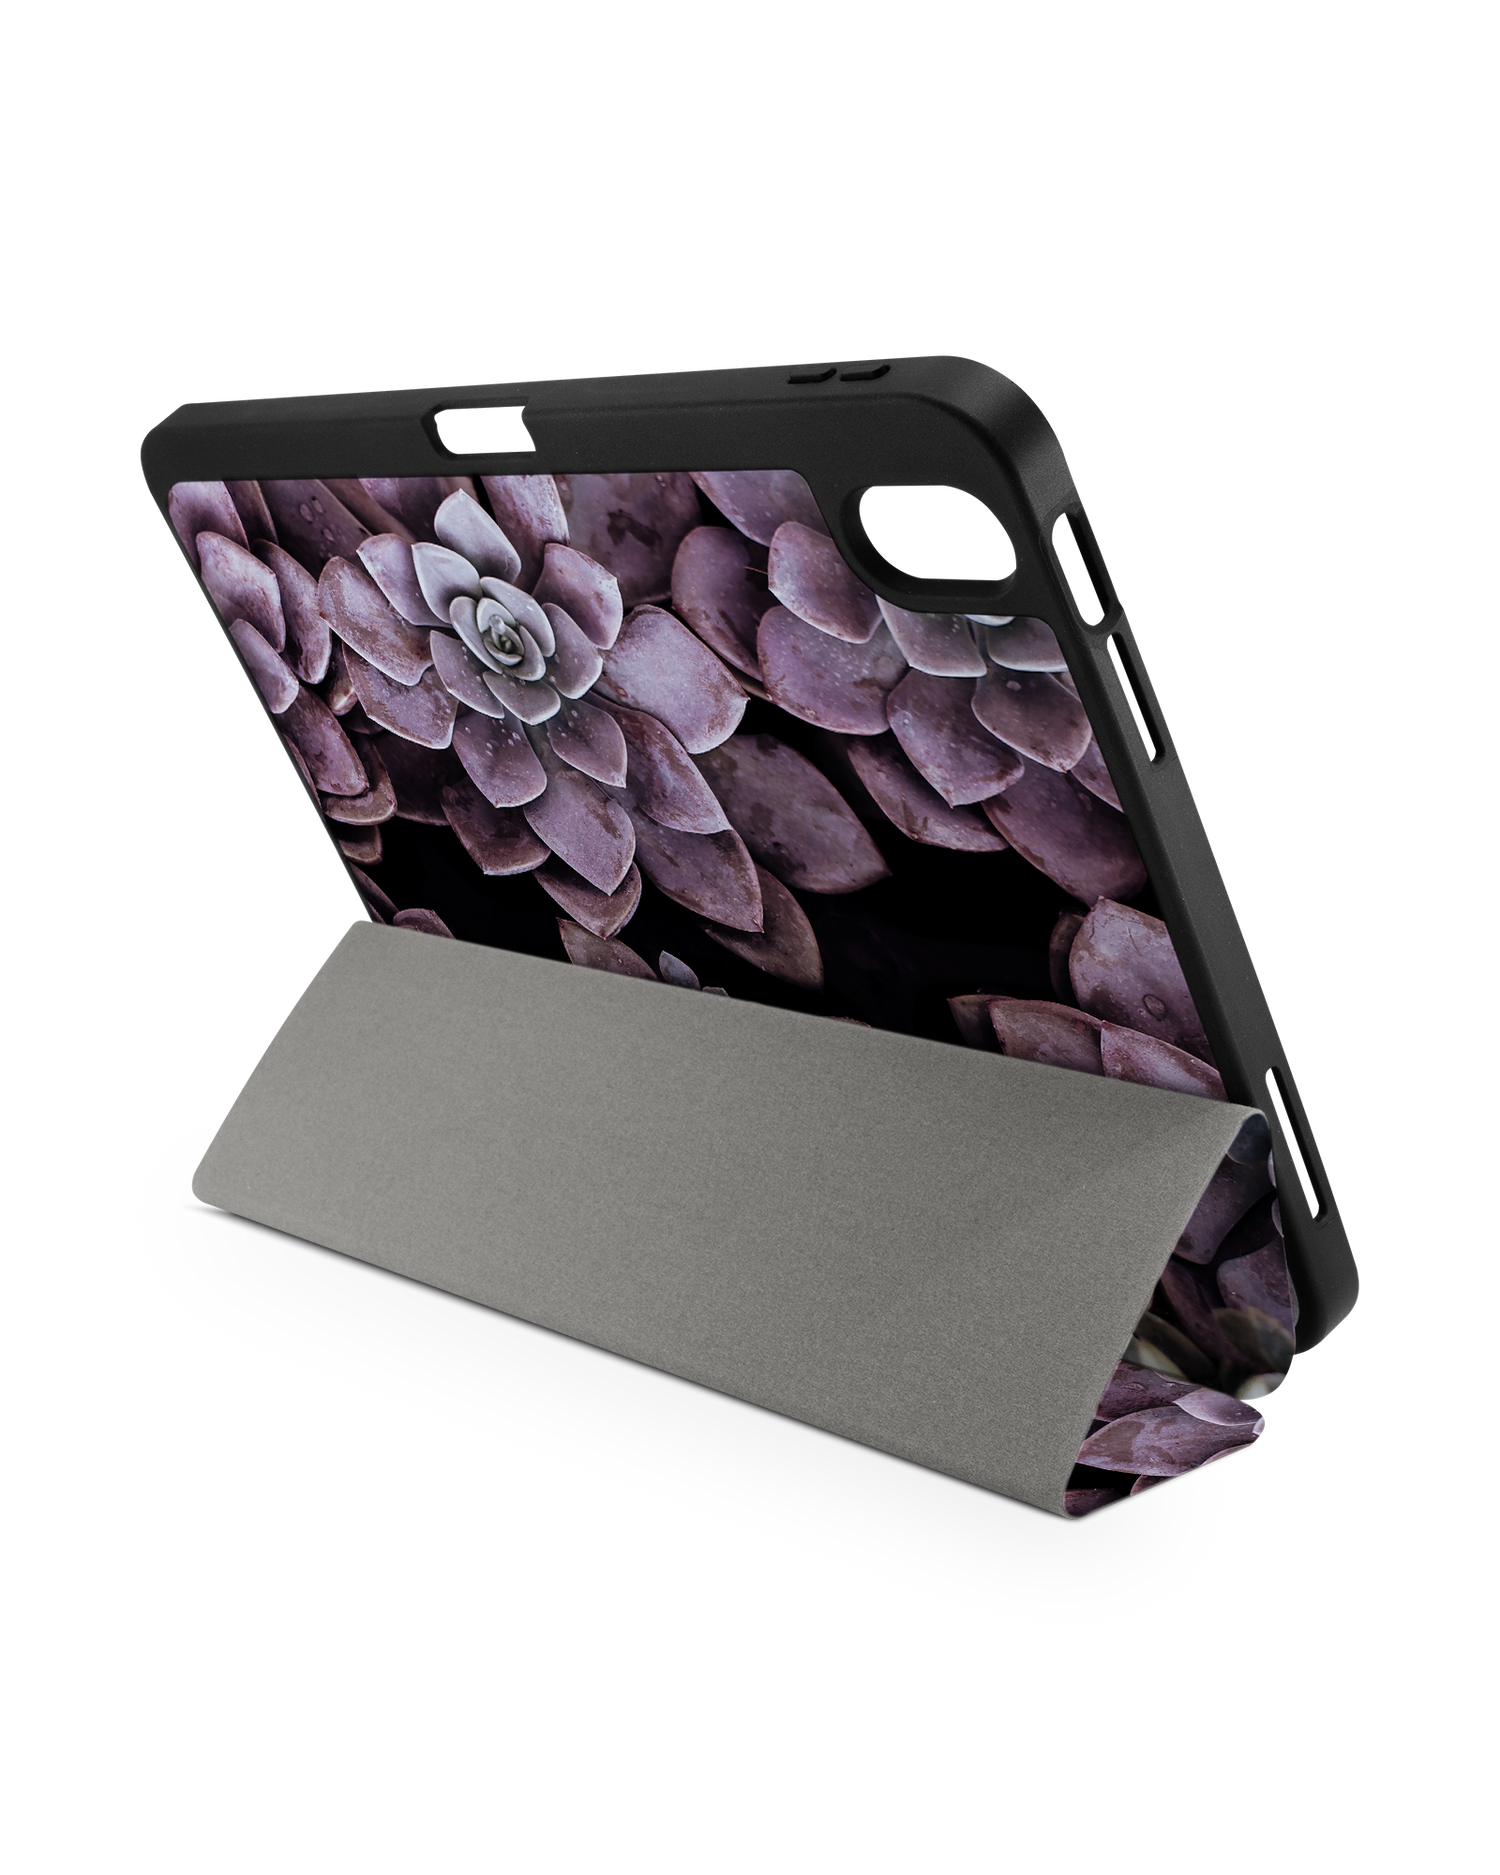 Purple Succulents iPad Case with Pencil Holder for Apple iPad (10th Generation): Set up in landscape format (back view)